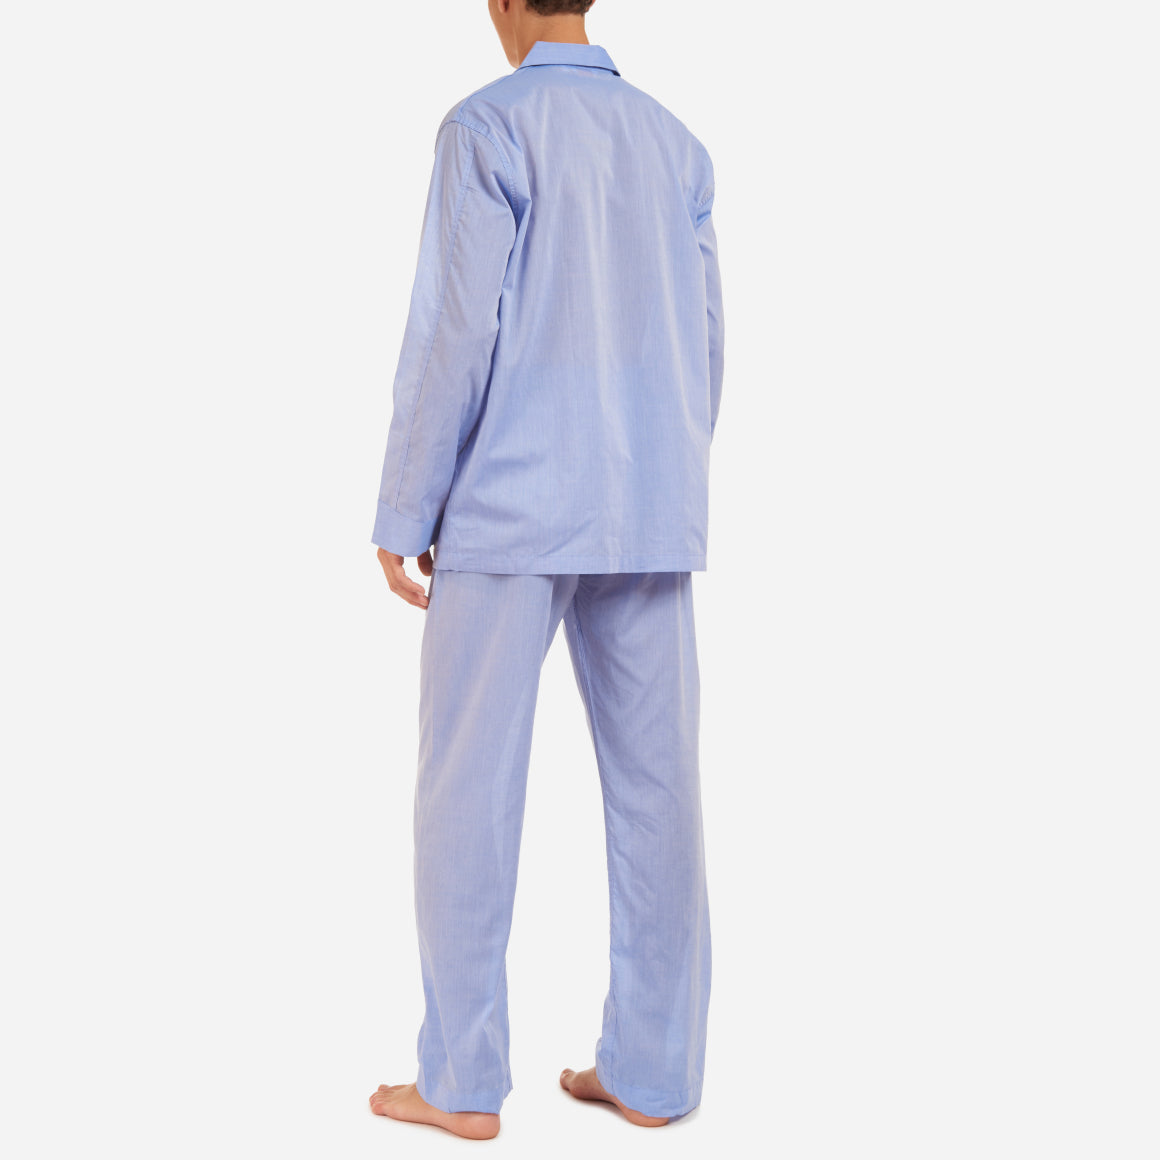 A back-facing model is wearing a long pajama set made of blue cotton batiste fabric.